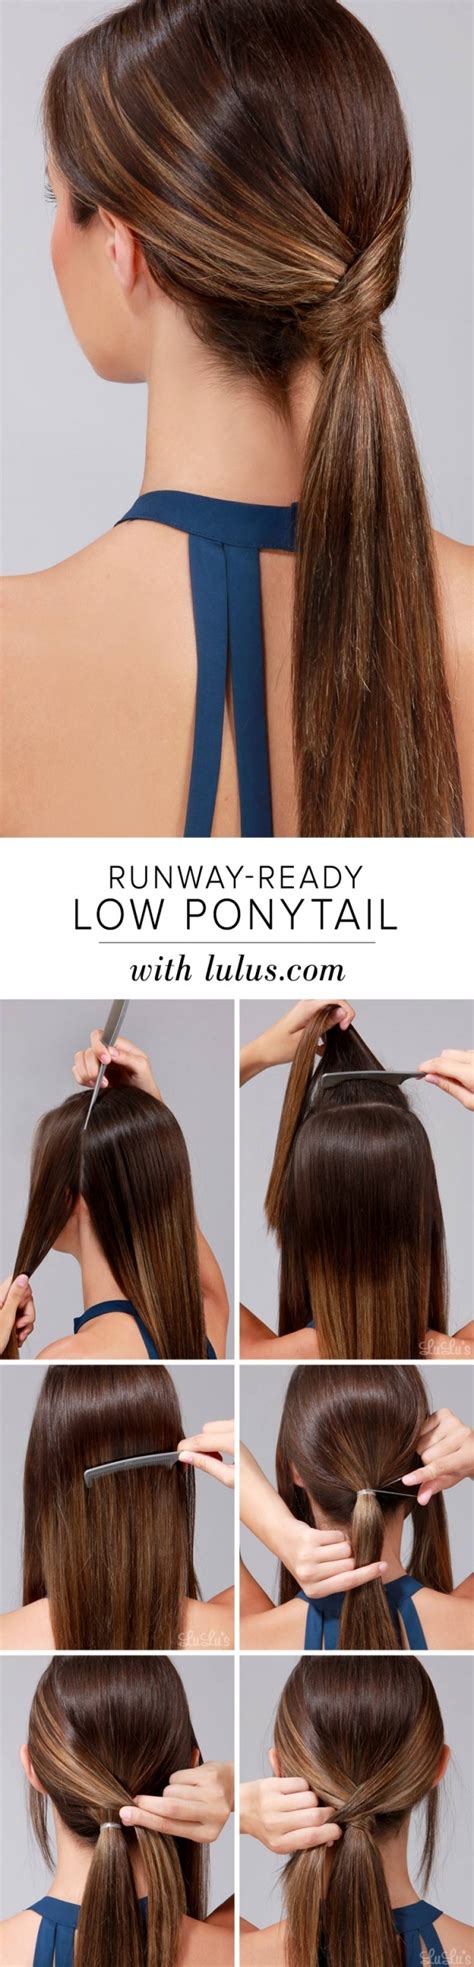 15 Simple Yet Stunning Hairstyle Tutorials For Lazy Women